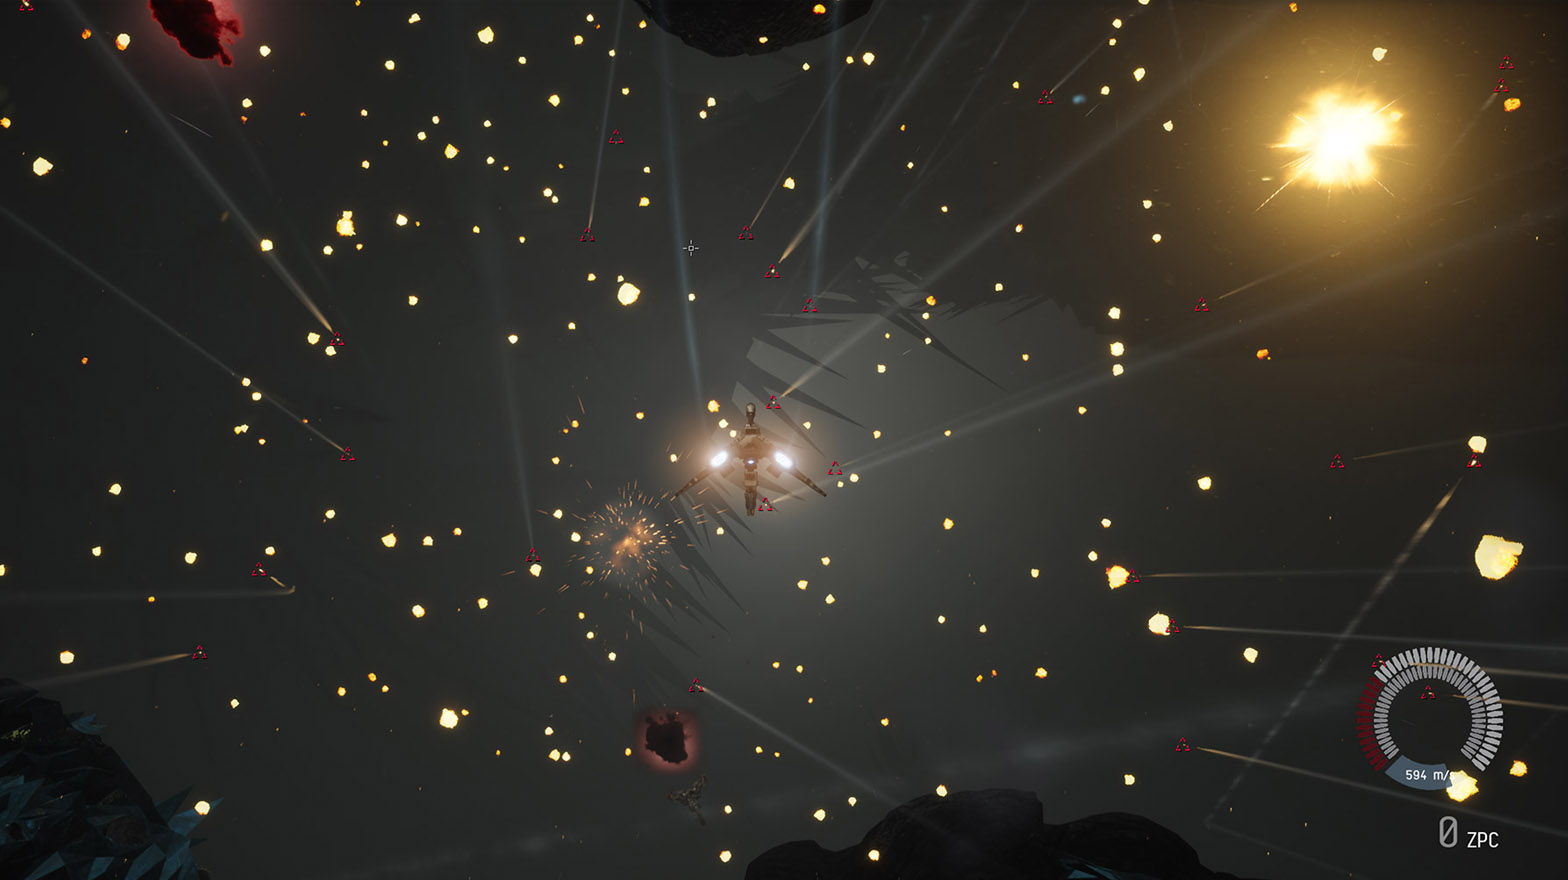 Gameplay showing ships in space with HUD and targeting